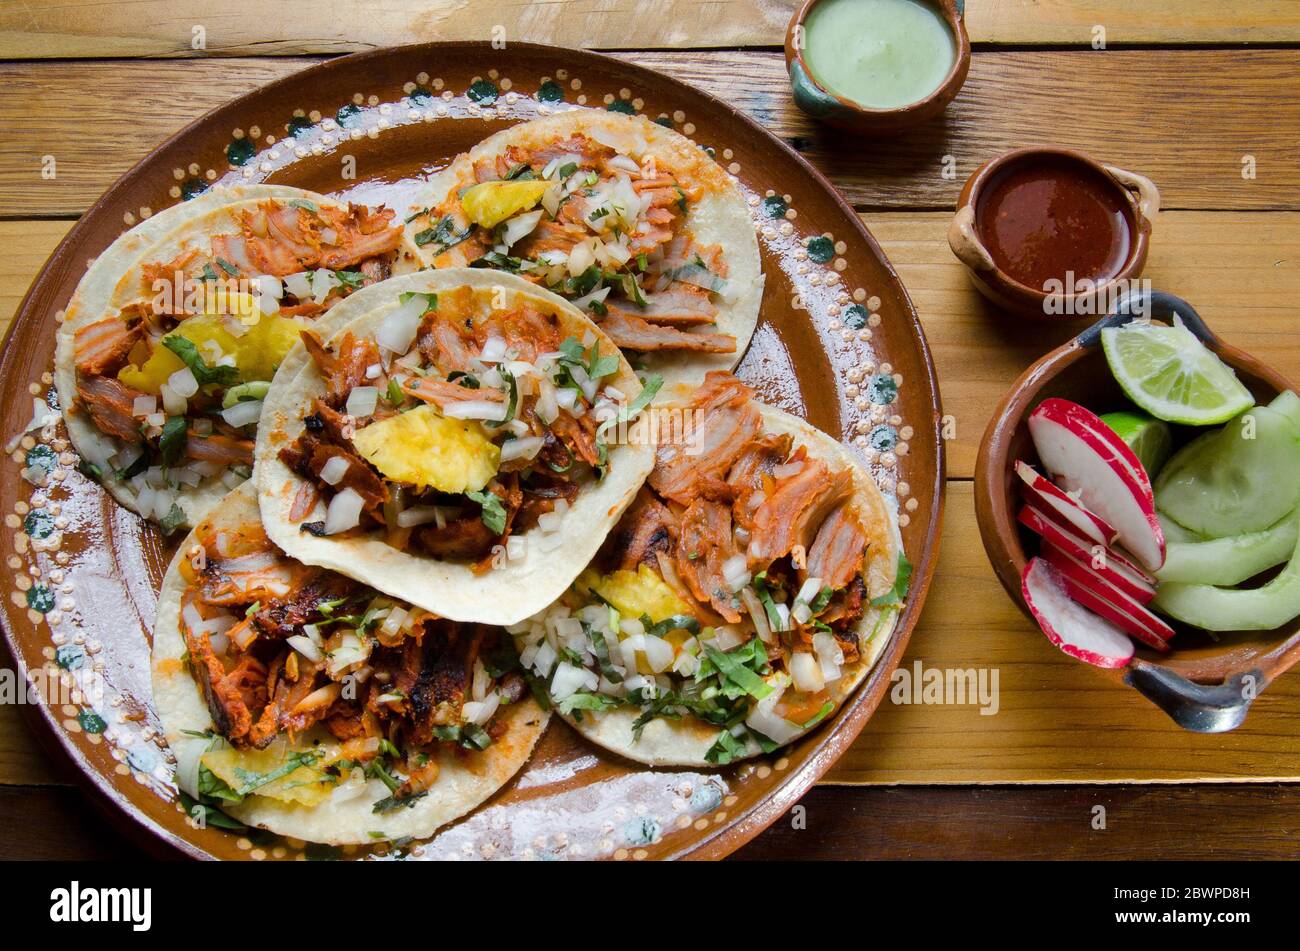 Authentic mexican tacos al pastor Stock Photo